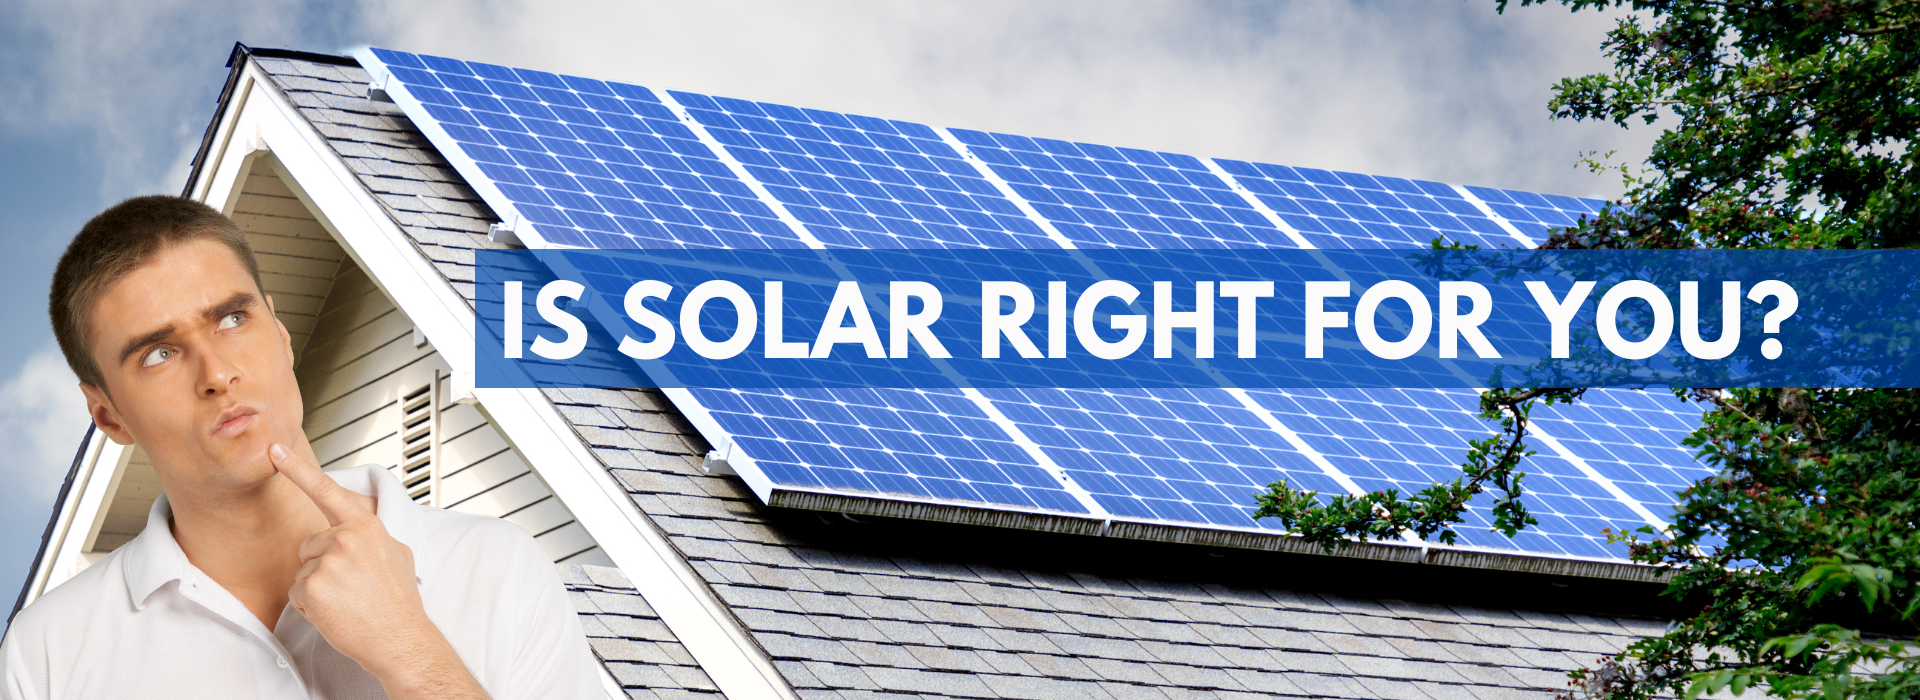 Is solar right for you?